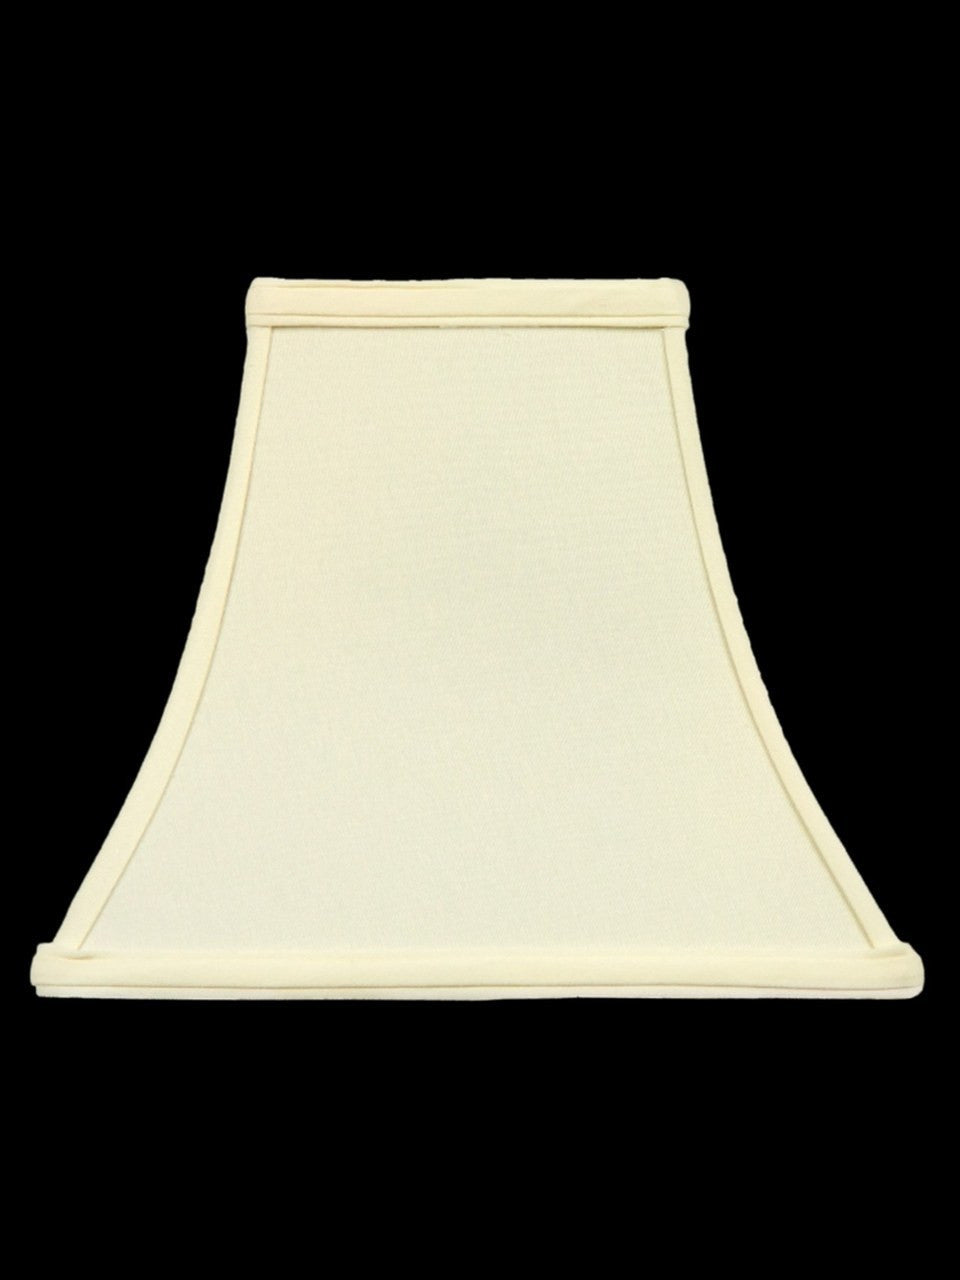 UpgradeLights White Eggshell Silk 10 Inch Square Bell Candle Stick Replacement Lamp Shade